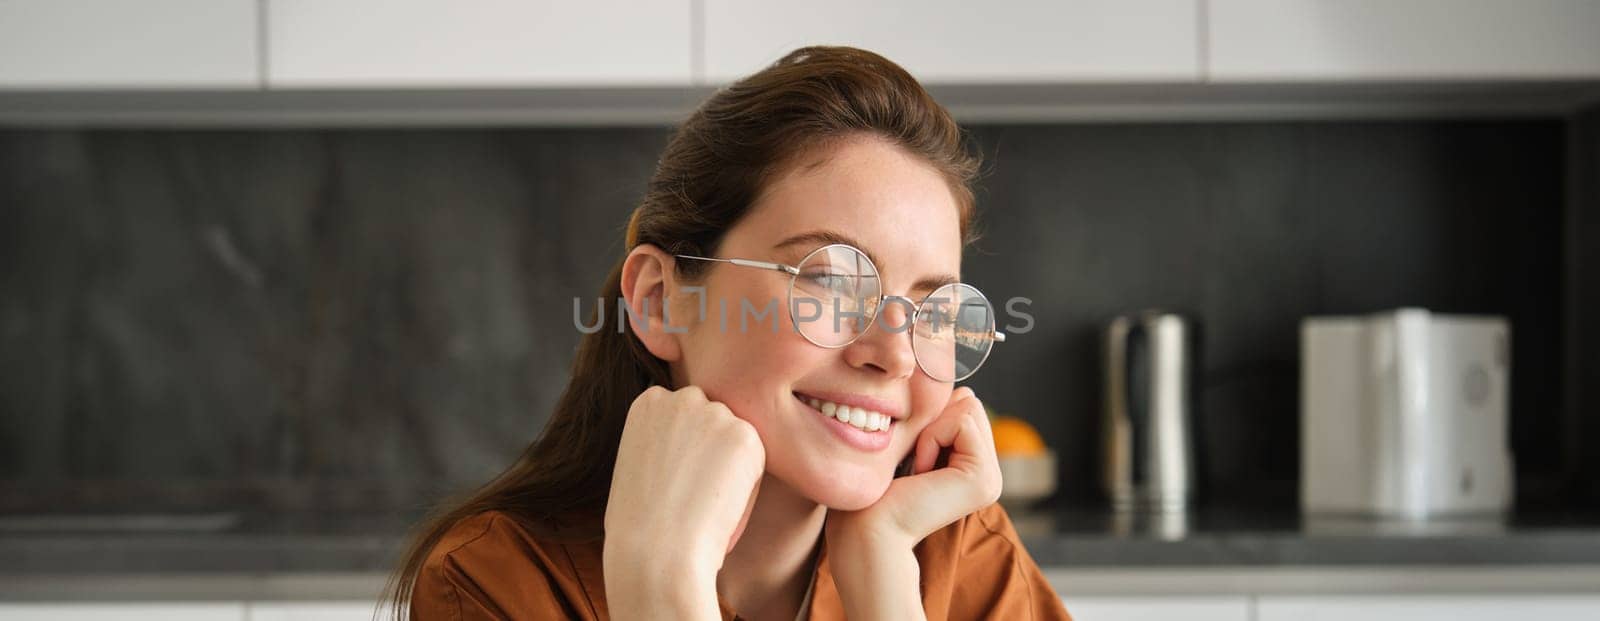 Portrait of lovely, happy young woman, wearing glasses, sitting in kitchen with dreamy, thoughtful face expression, spending time at home.